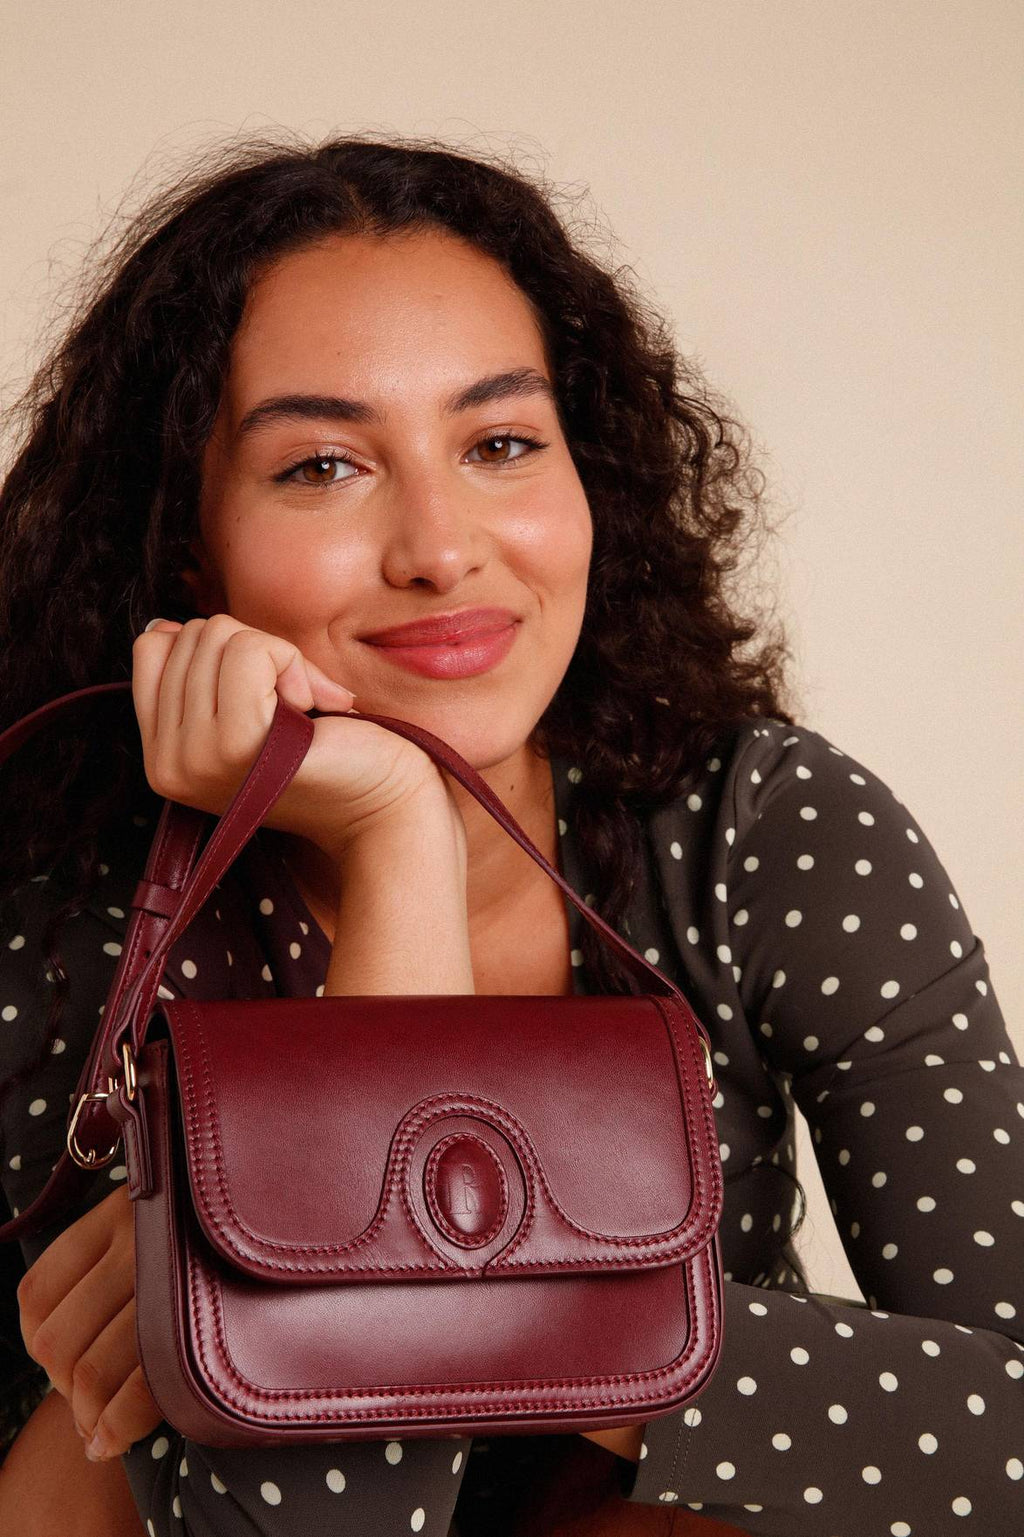 The Sac a main Bibi Nappa is the perfect accessory for any outfit. Made from 100% smooth cow leather, this small bag features a stylish "R" embossed flap with a magnetic closure. With its sleek design and bold burgundy color, it's both functional and fashionable.